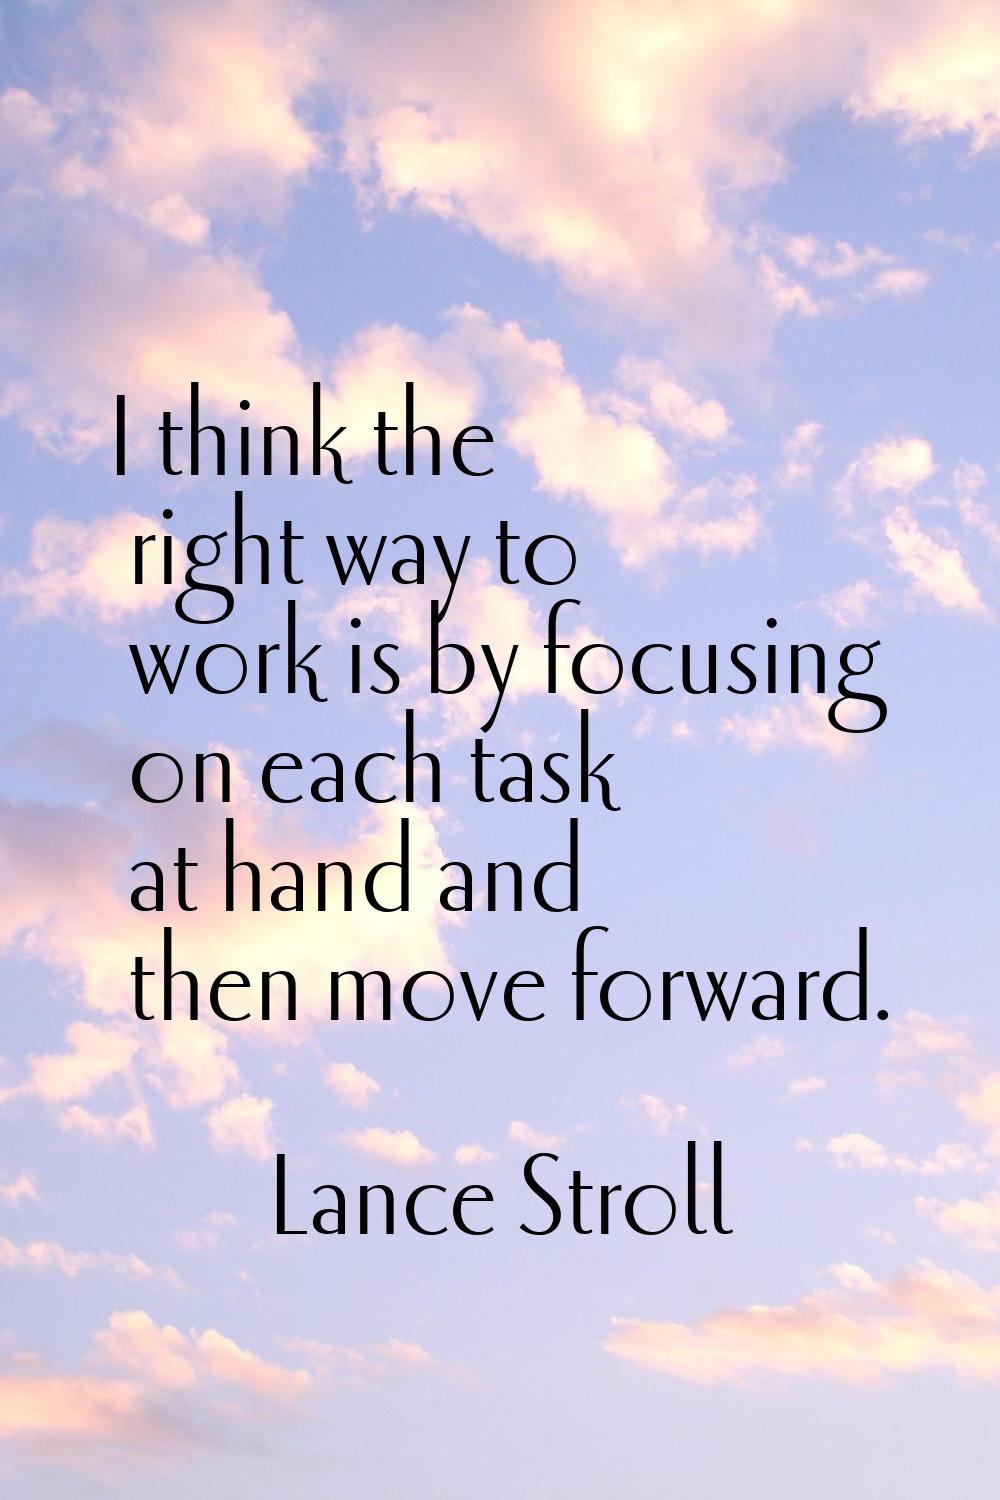 I think the right way to work is by focusing on each task at hand and then move forward.